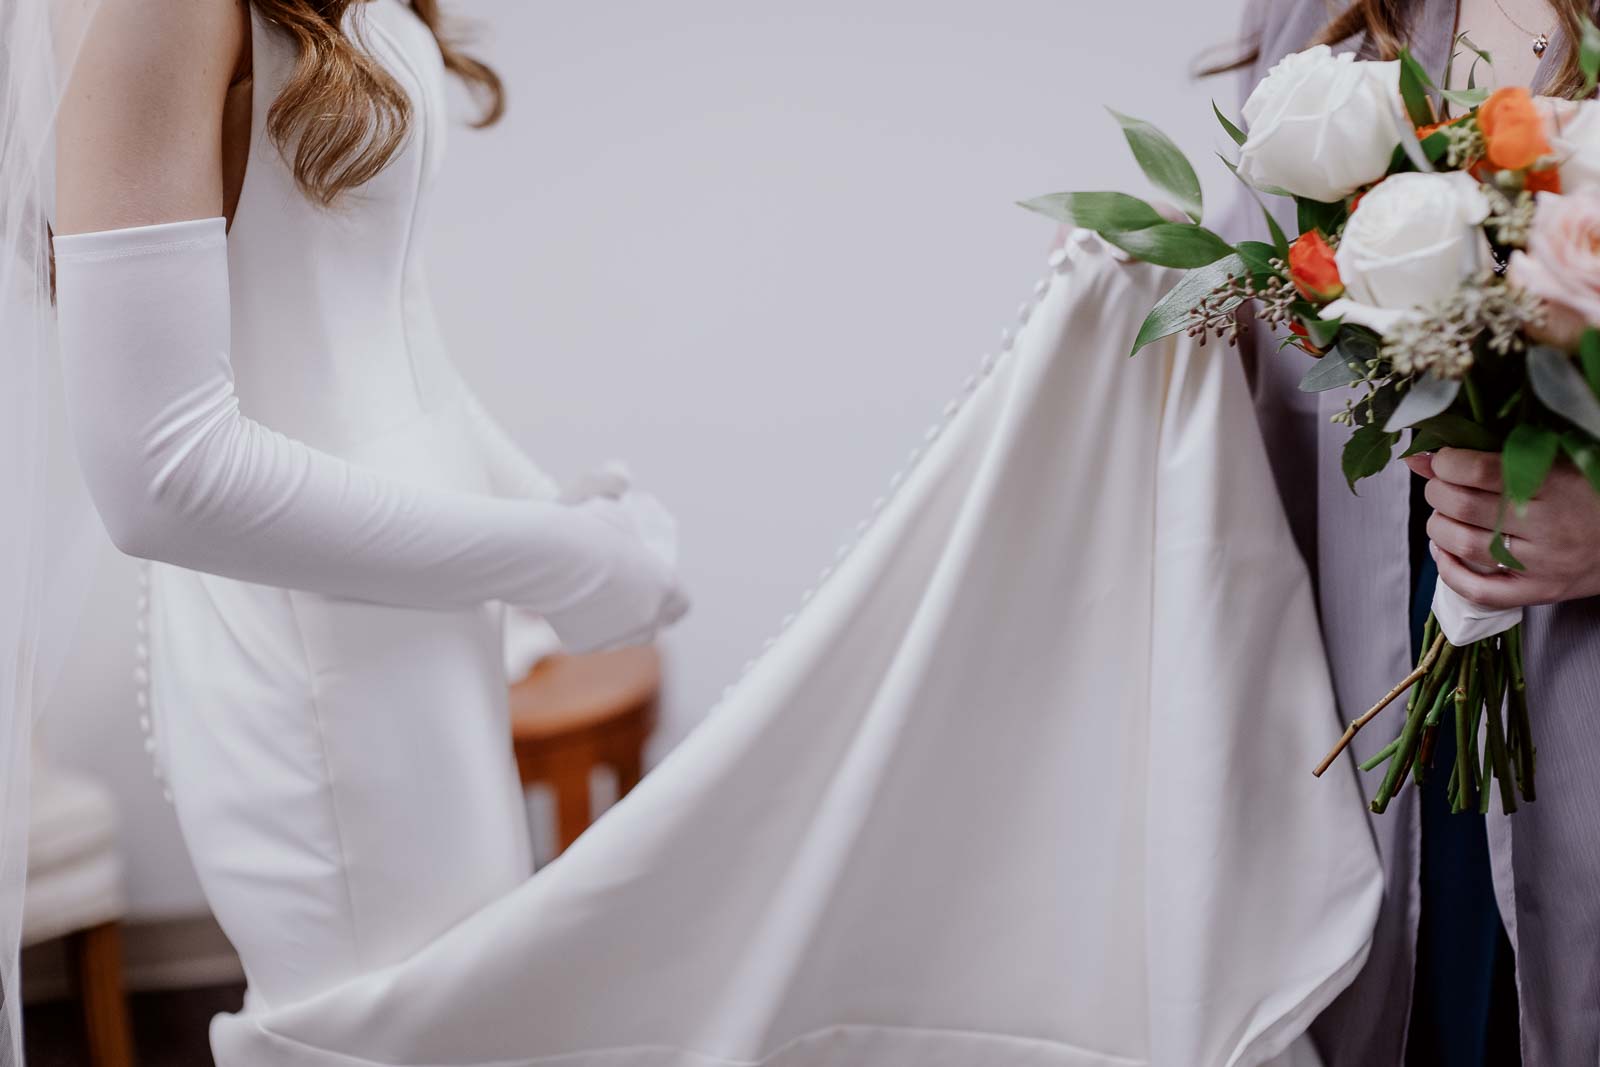 A bridesmaids helps the bride holding her dress